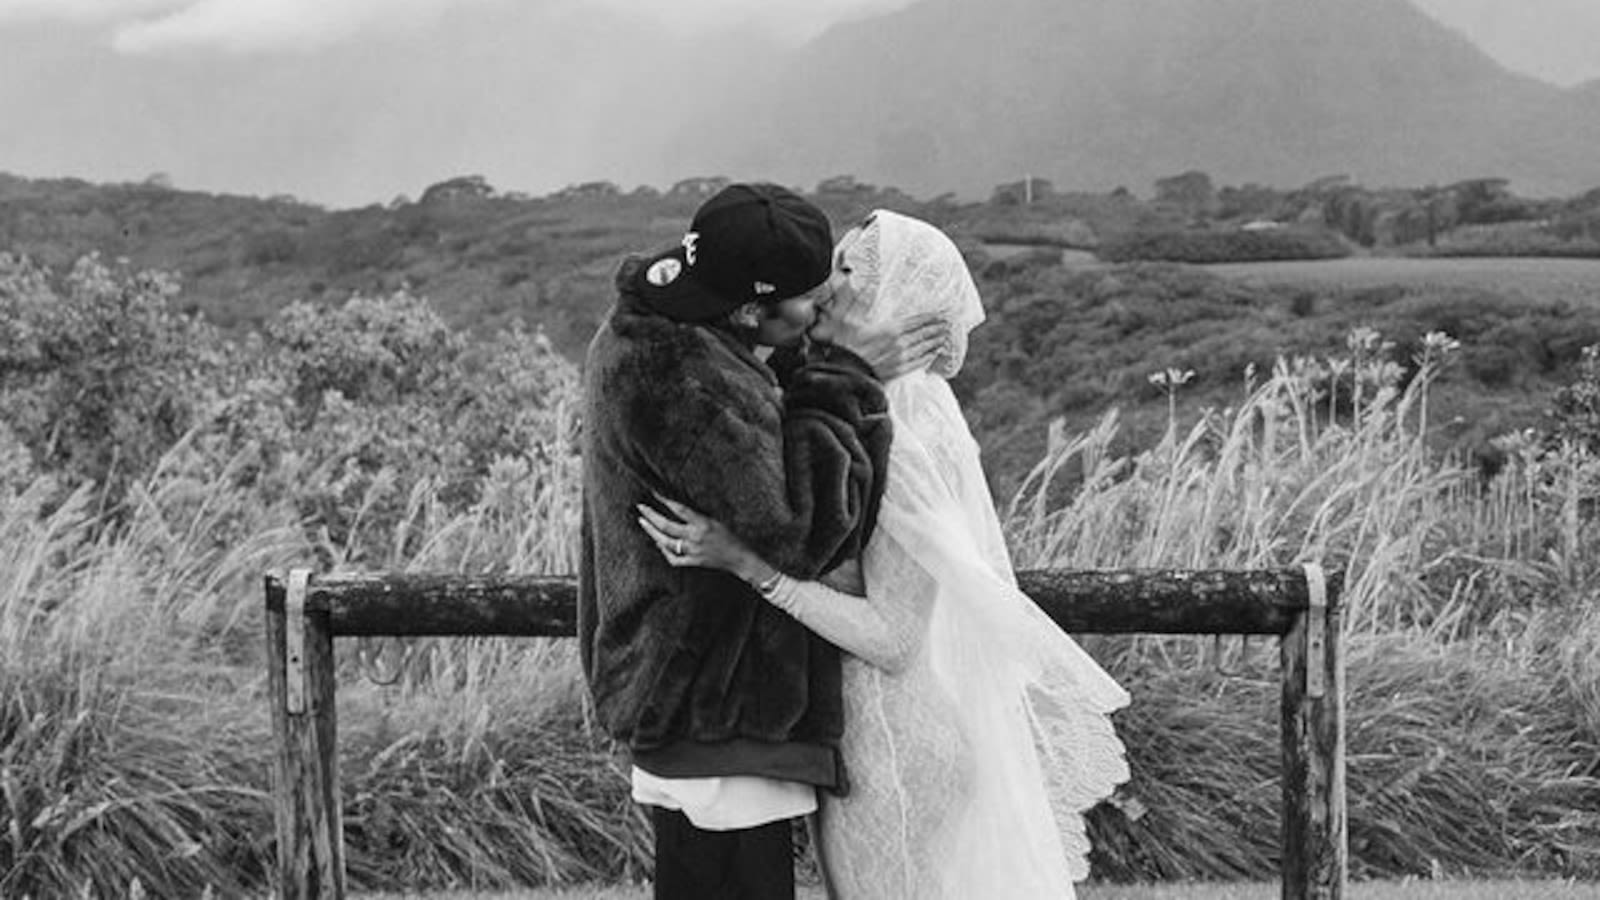 Hailey and Justin Bieber expecting 1st baby together: See sweet photos, video from announcement